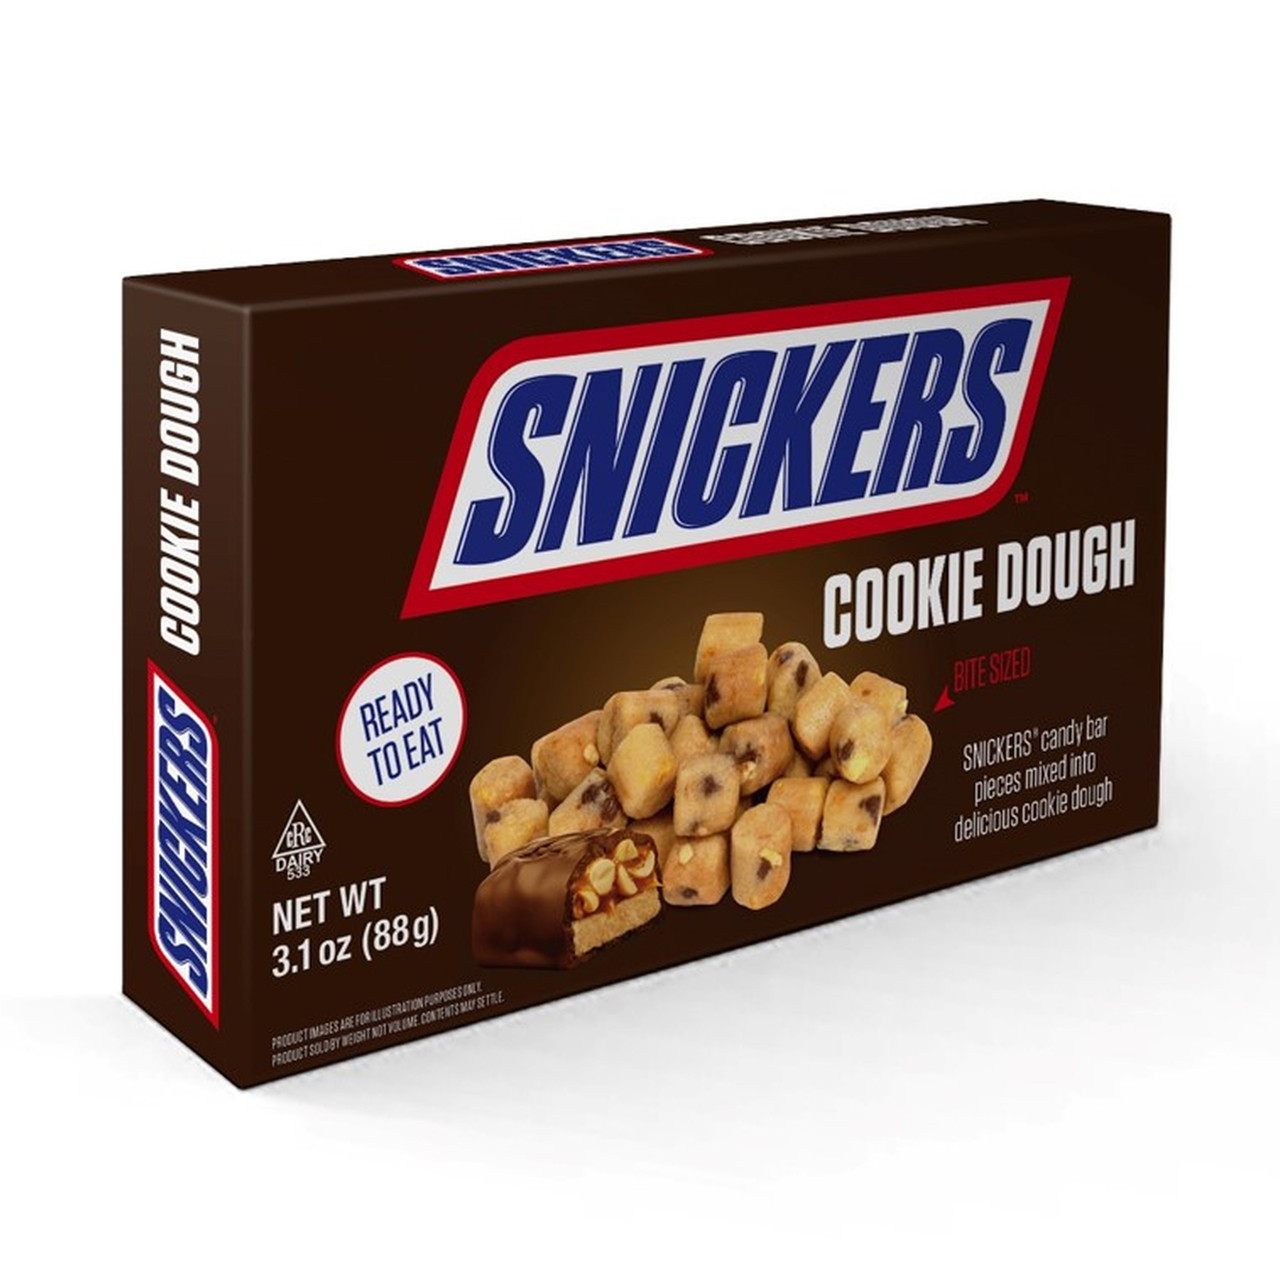 Cookie Dough Bites Variety Pack- Theater Box - 15 pack